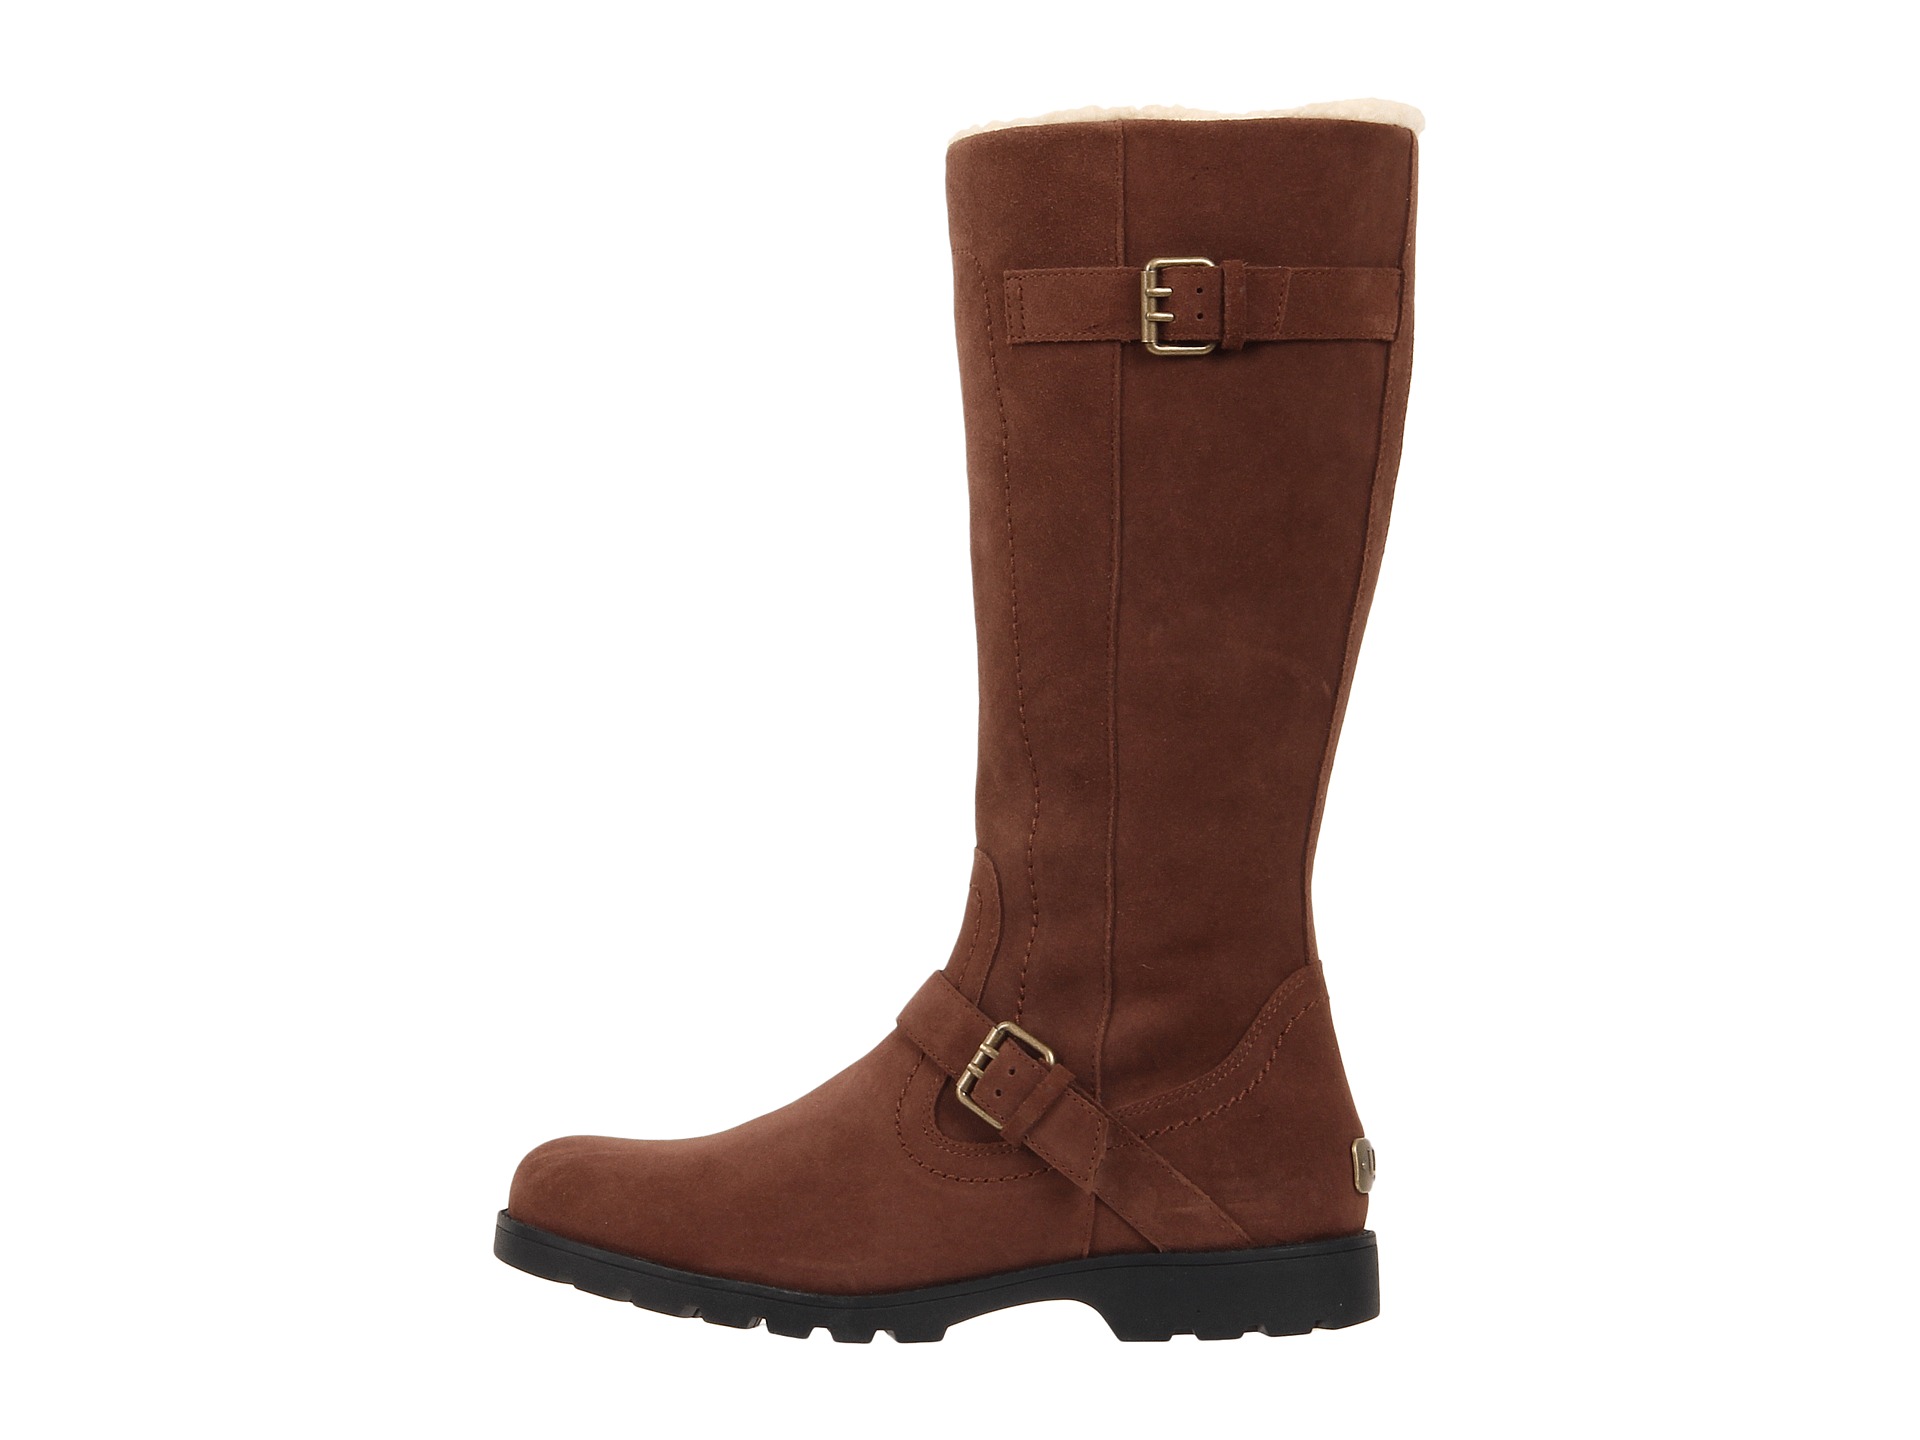 No results for ugg danton chocolate - Search Zappos